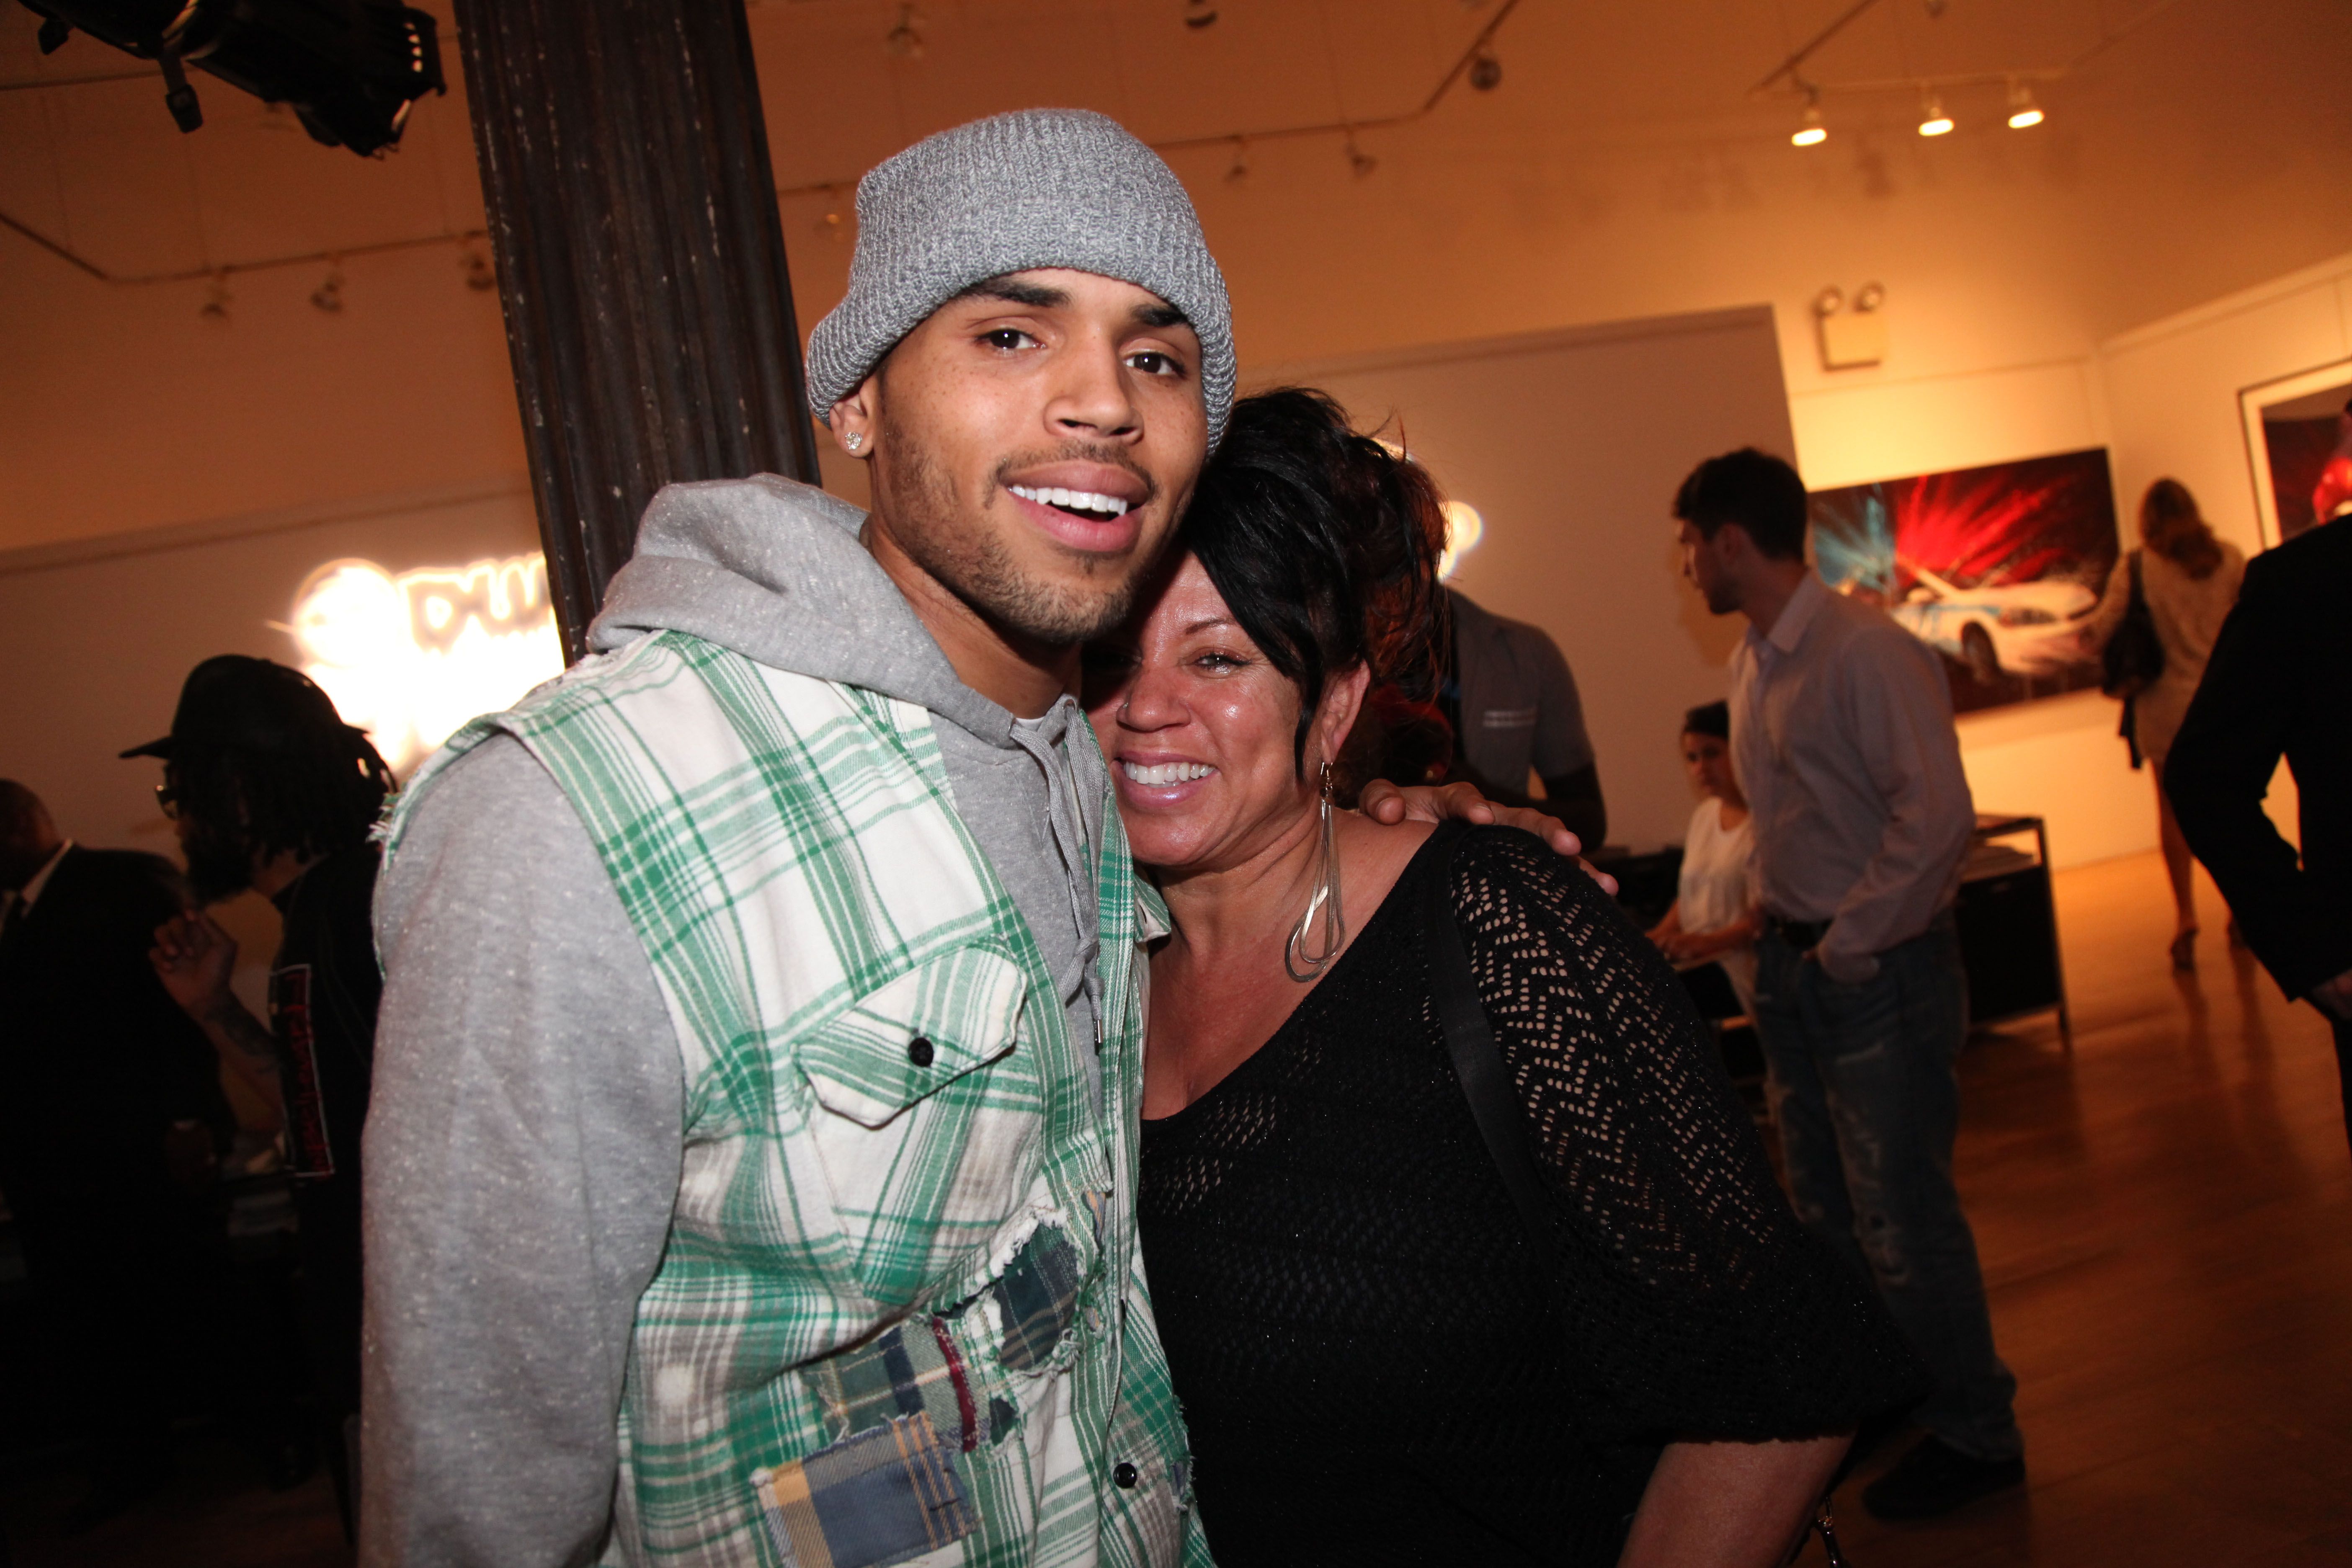 Chris Brown and Joyce Hawkins at the Dum English Exhibition opening at Opera Gallery on June 11, 2012 | Photo: Getty Images